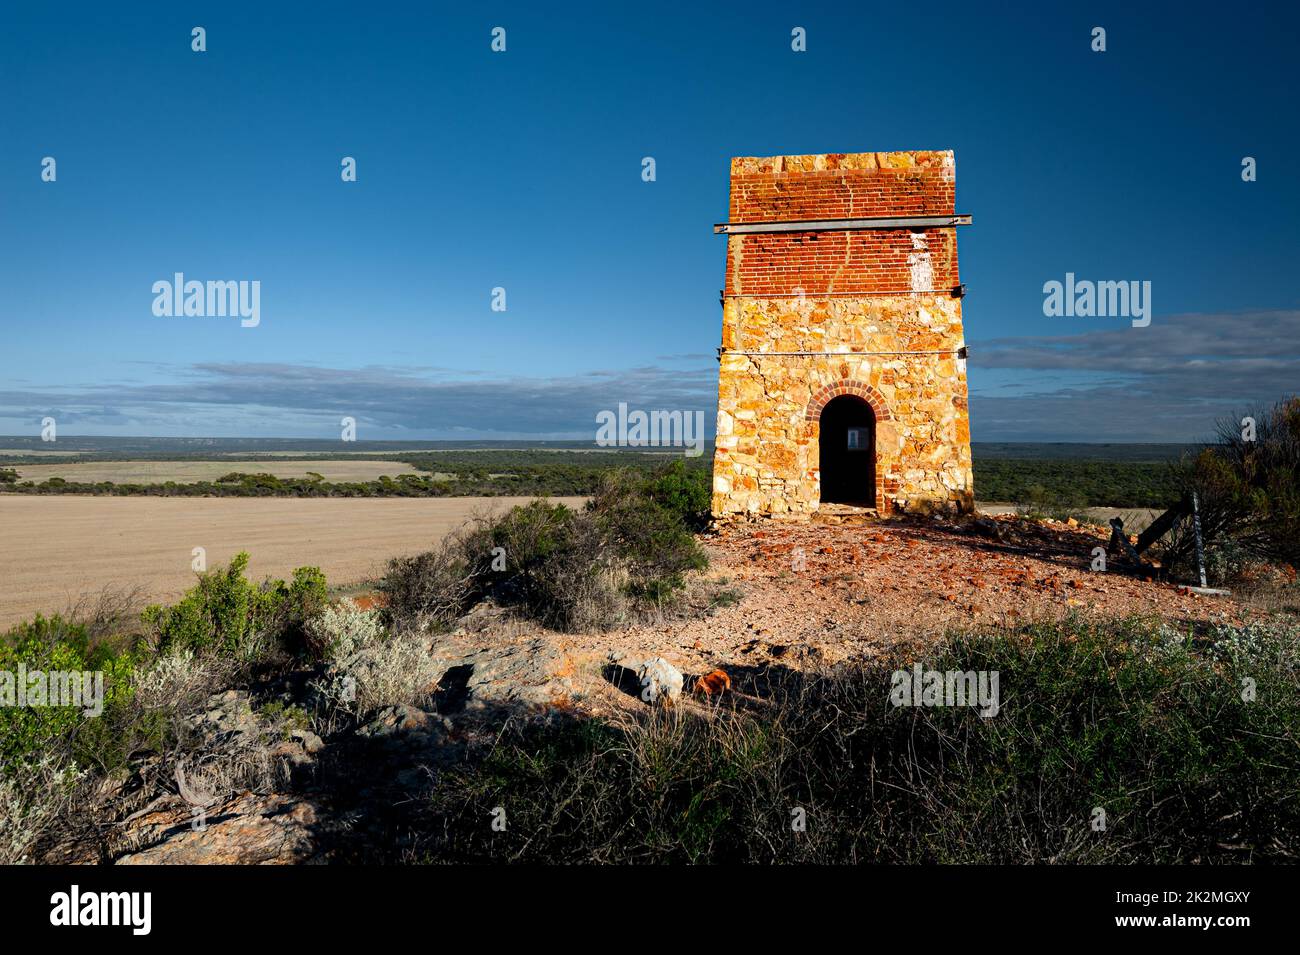 Historical Warribano Chimney towering on a hill in Western Australia's Outback. Stock Photo